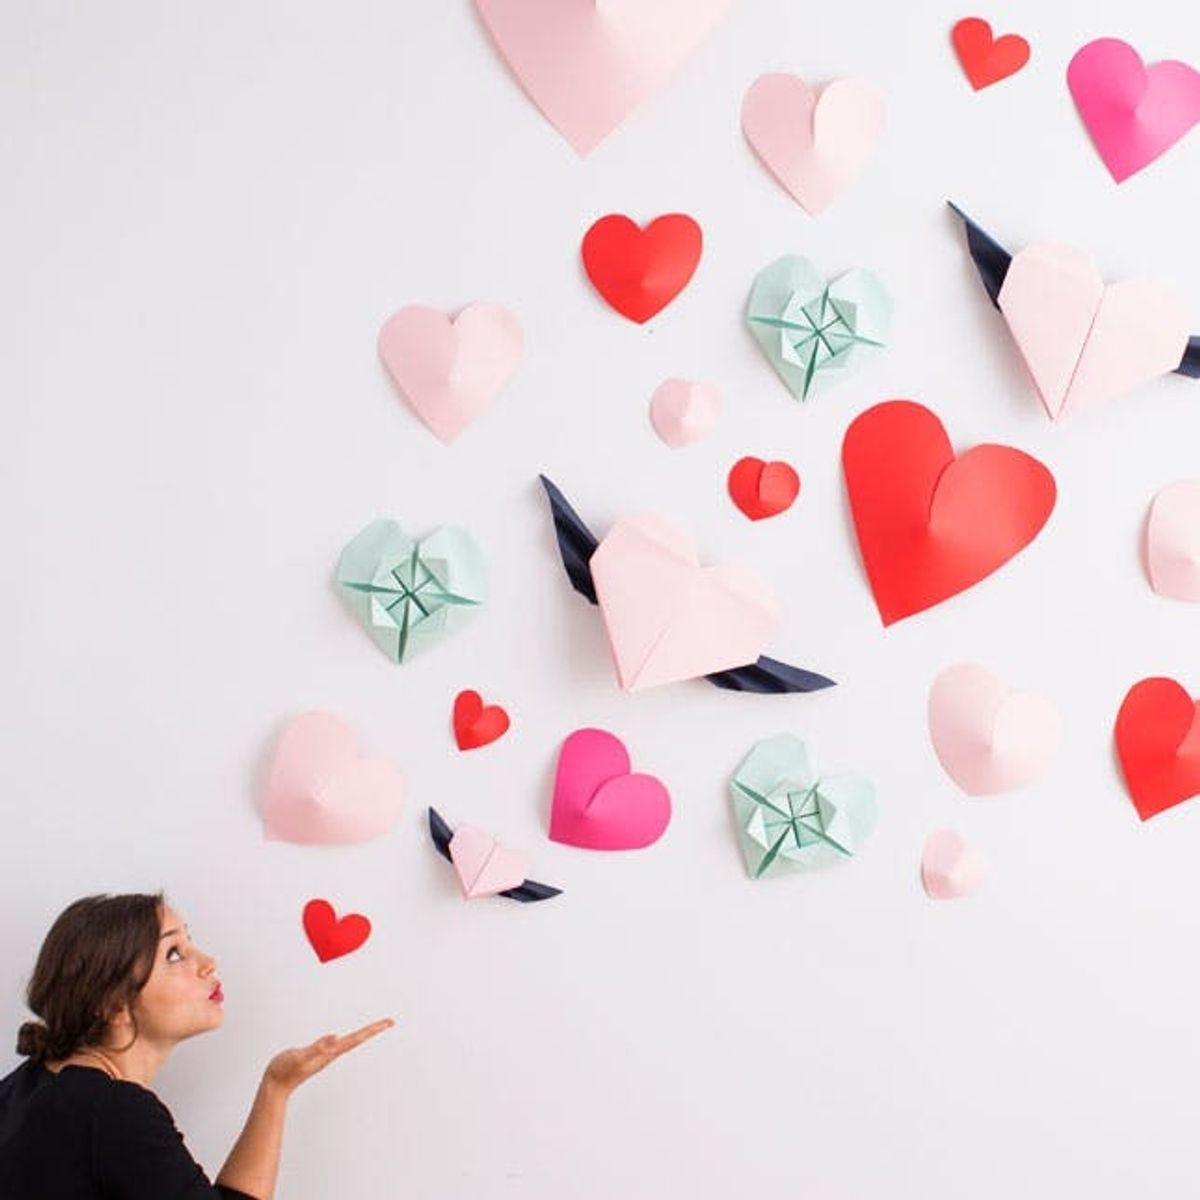 How to Make the Sweetest Photo Backdrop Ever